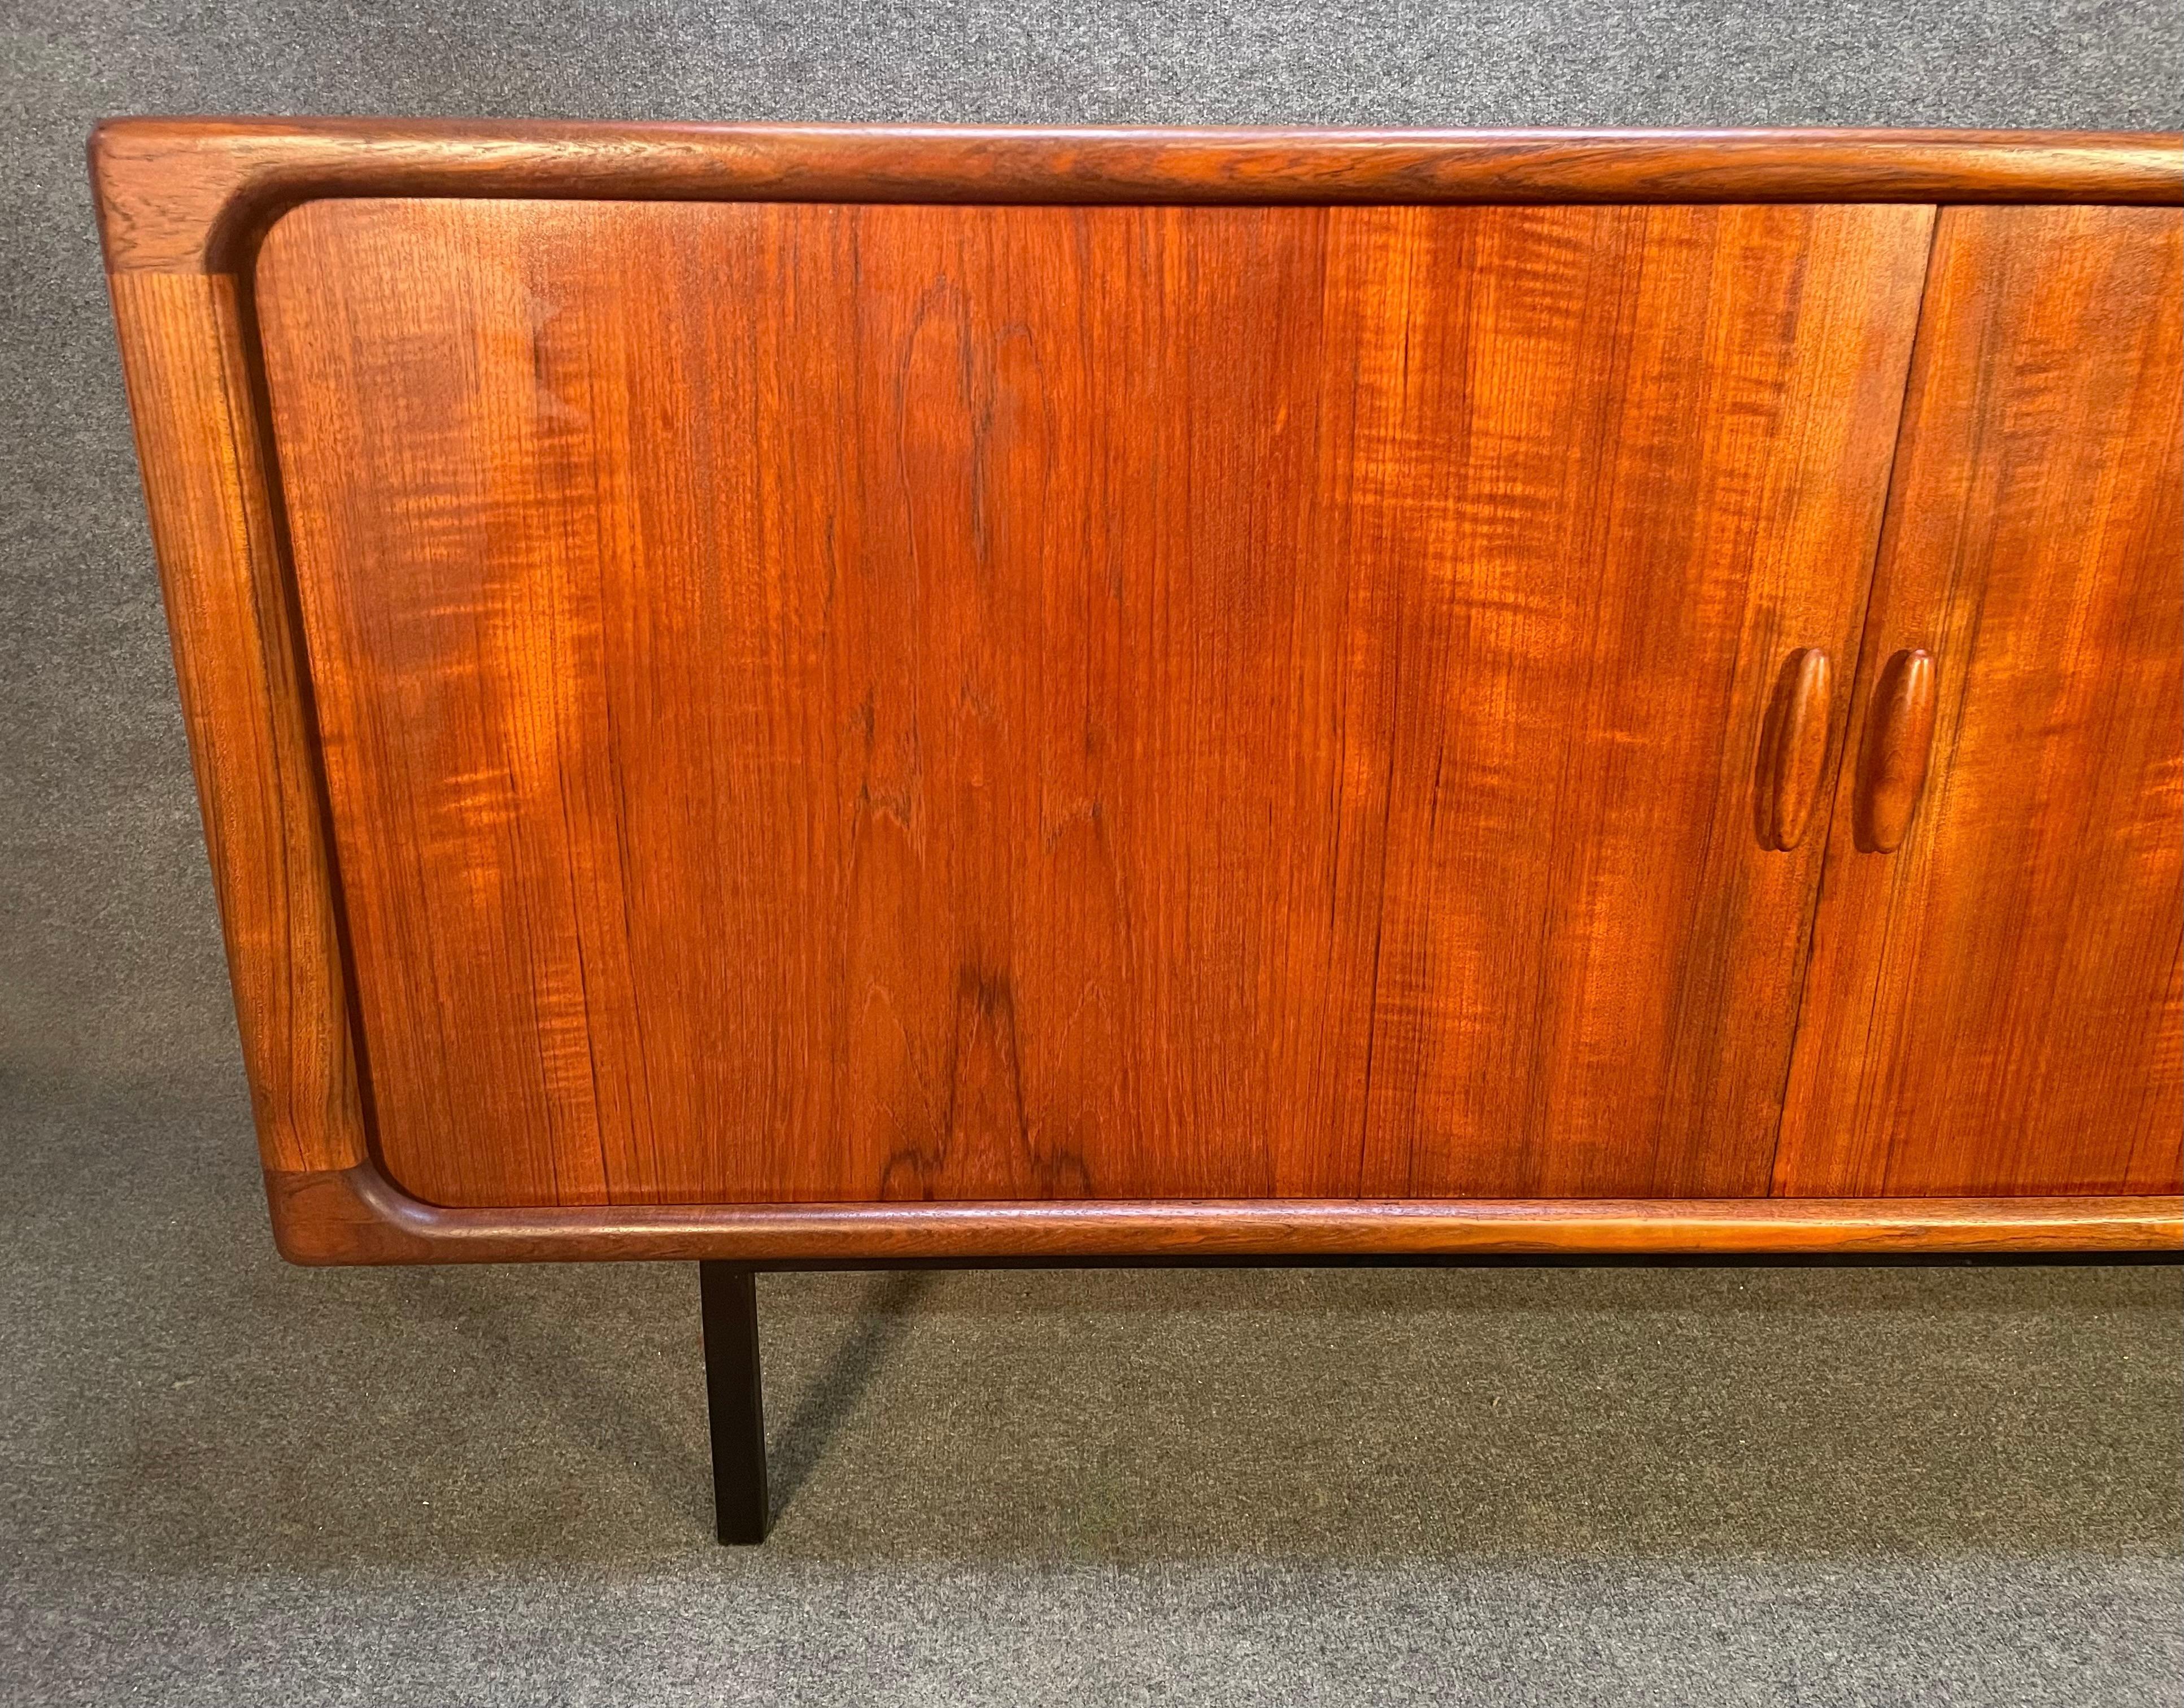 Here is a beautiful scandinavian modern teak sideboard manufactured by Dyrlund in the 1970's.
This exquisite credenza, recently imported from Europe to California before its refinishing, features a vibrant wood grain, two large smooth rolling